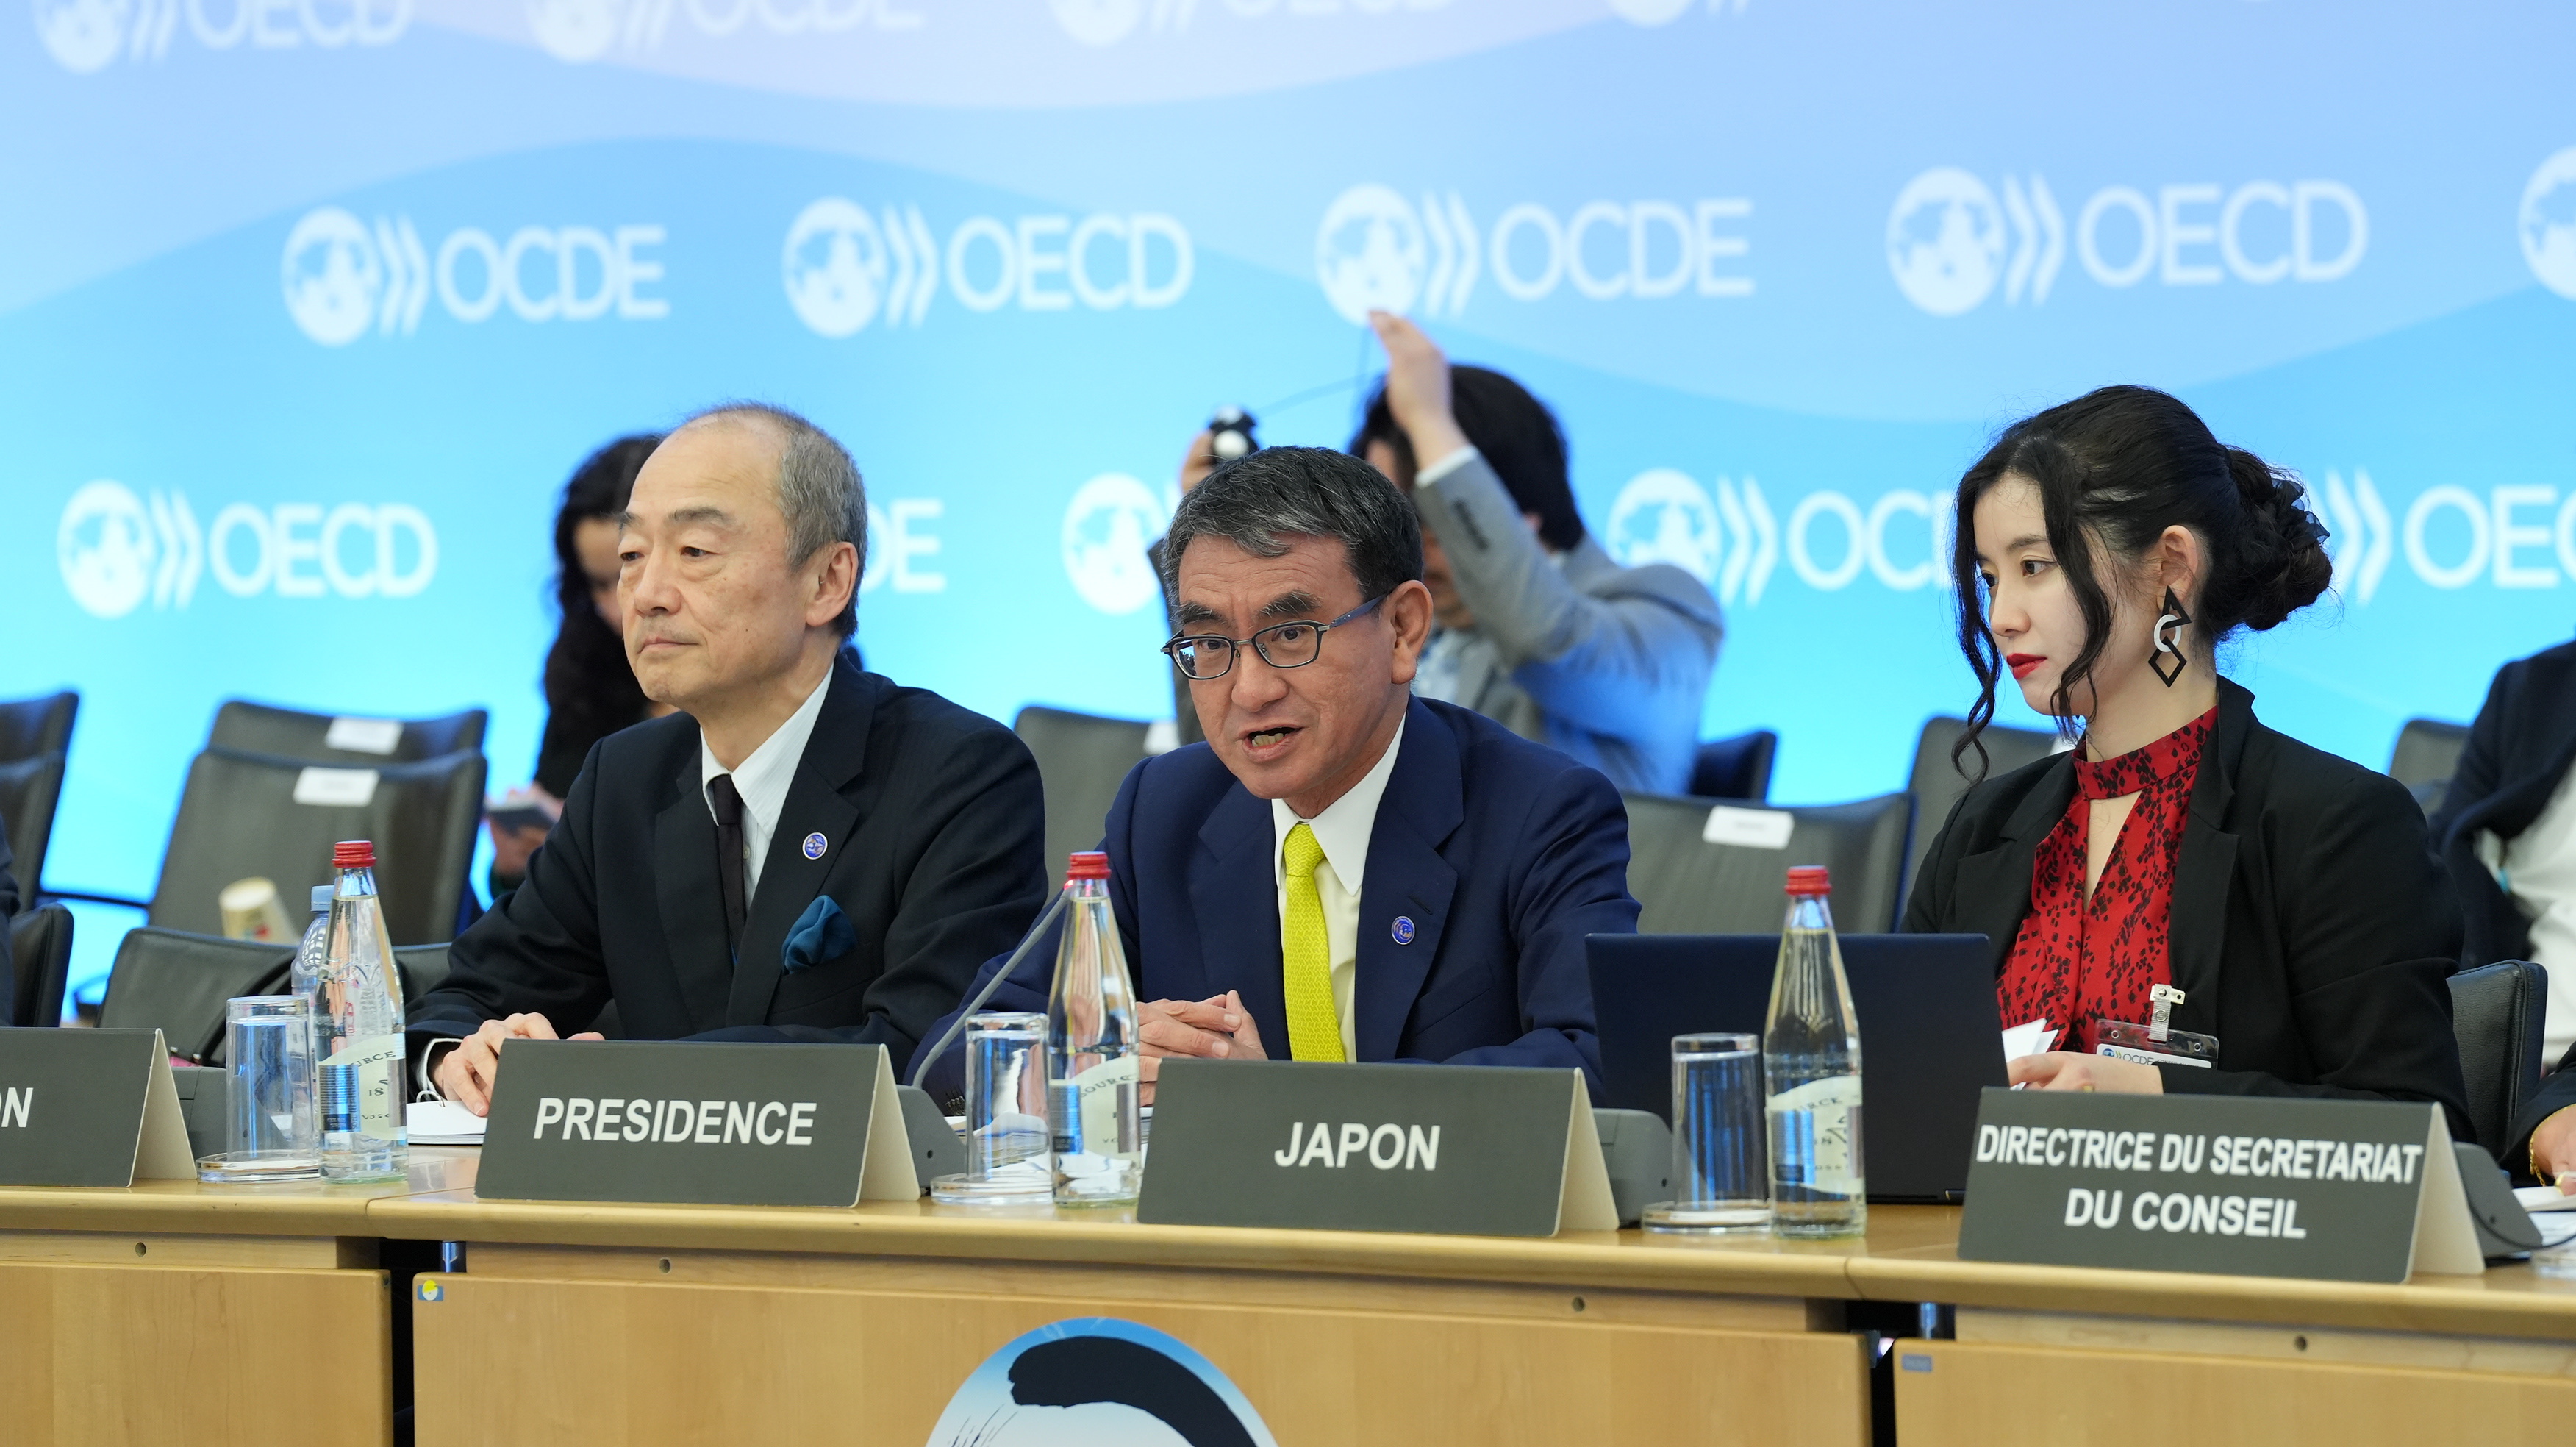 Digital Minister Kono chairs the OECD Ministerial Council meeting.